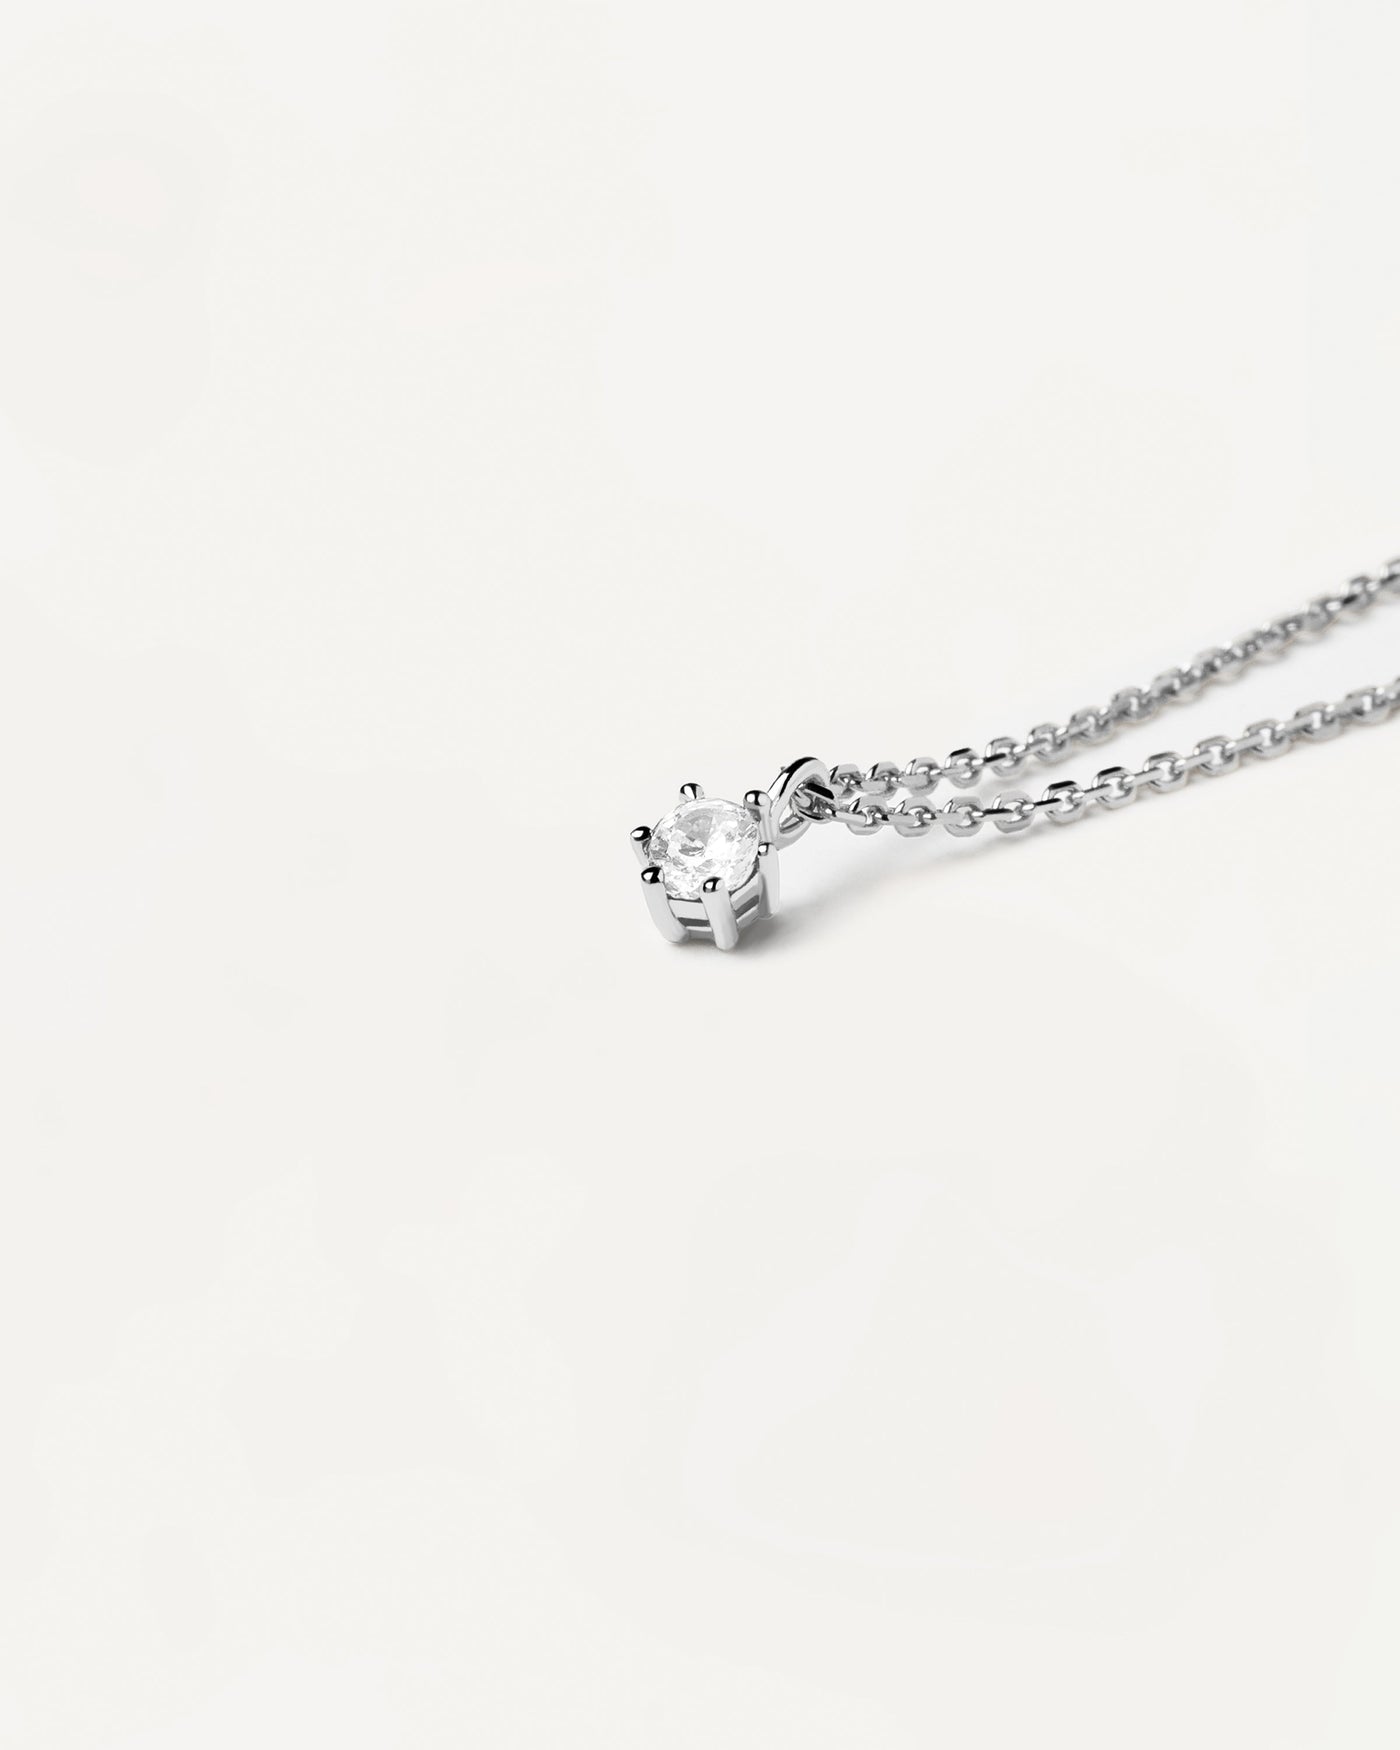 2023 Selection | White Solitary silver necklace. Single link chain necklace in sterling silver with a white zirconia on prongs. Get the latest arrival from PDPAOLA. Place your order safely and get this Best Seller. Free Shipping.